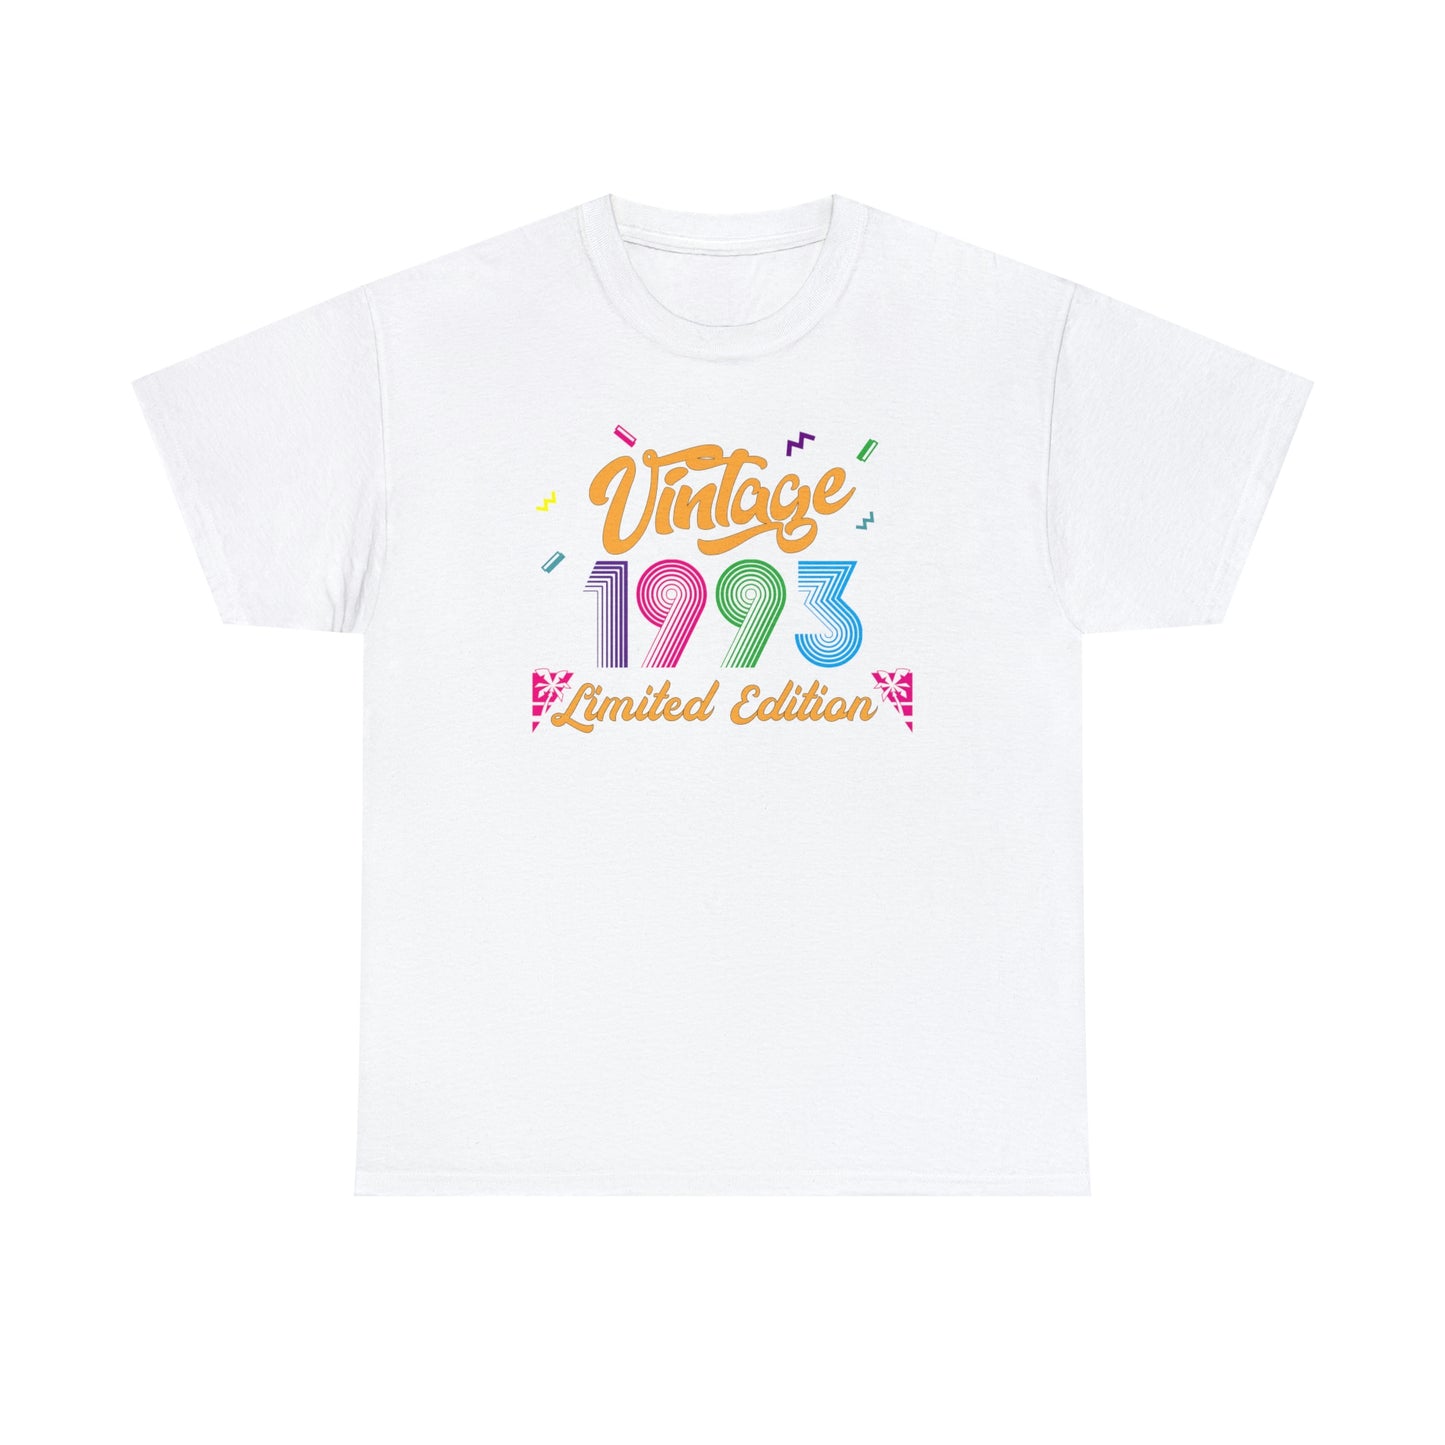 Graduation Year T-Shirt For 1993 T Shirt For Limited Edition TShirt For Class Reunion Shirt For Birth Year Shirt For  Retro Birthday Gift